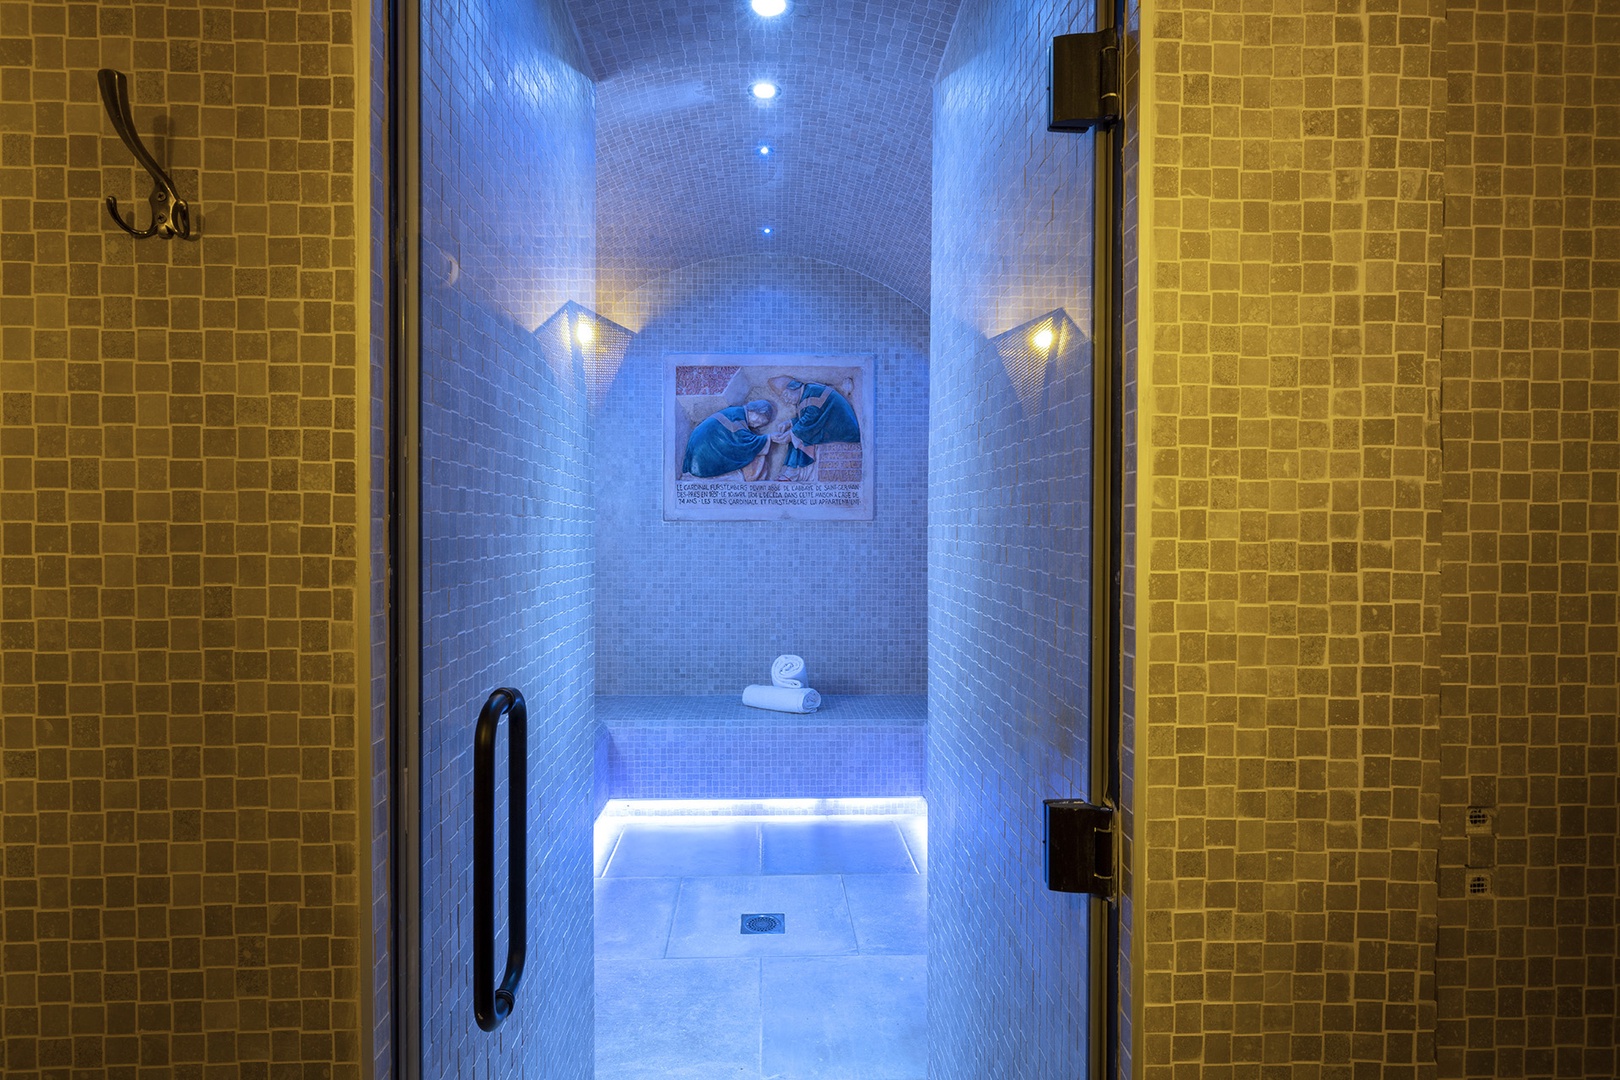 Step into the steam bath hammam for pure relaxation.